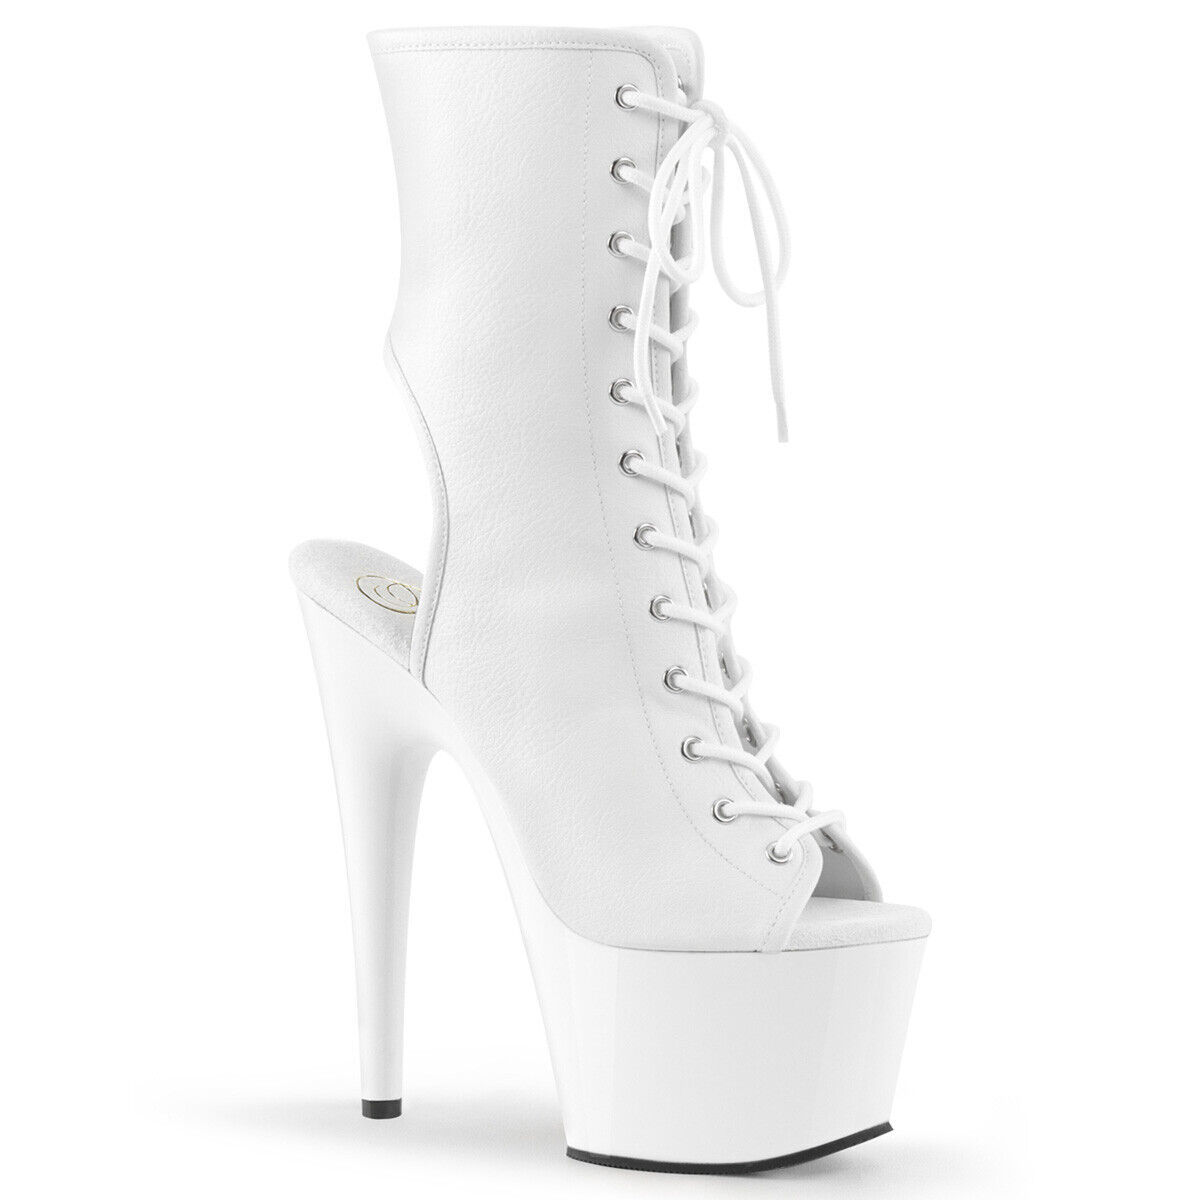 Primary image for PLEASER ADORE-1016 Women's White 7" Heel Platform Open Toe Ankle Side Zip Boots